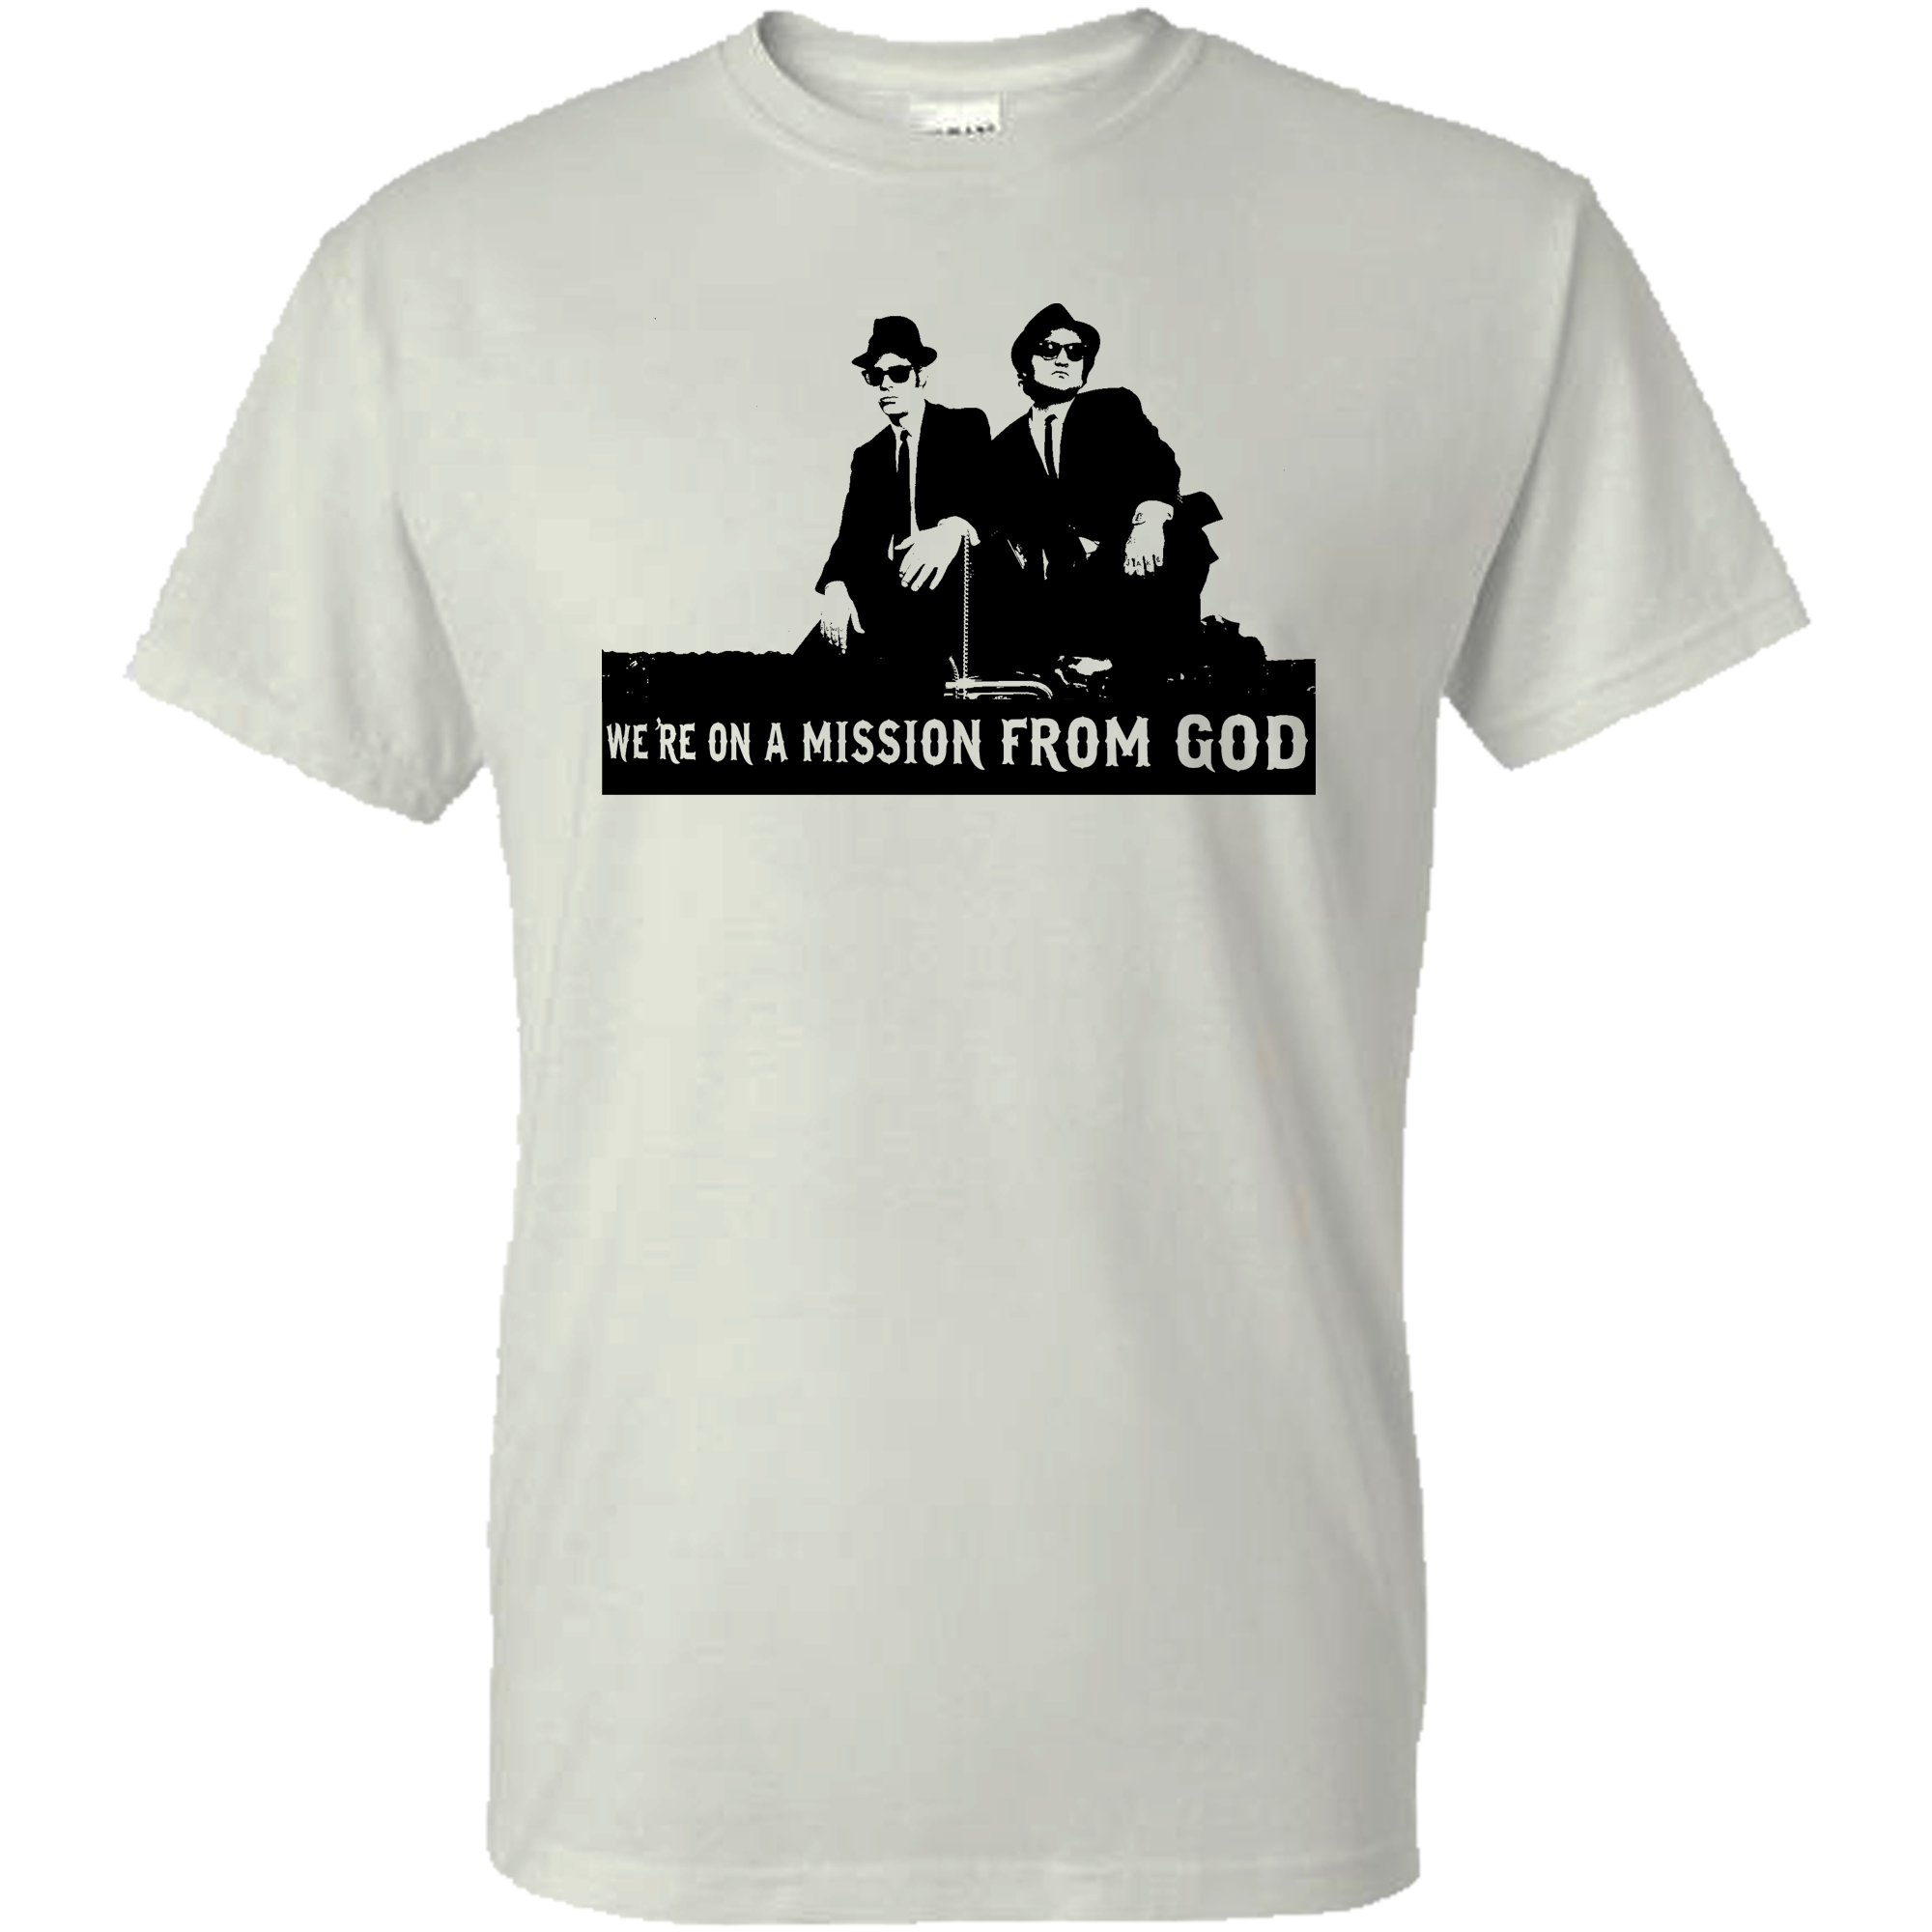 We're On A Mission From God T-Shirt, The Blues Brothers Tee Shirt